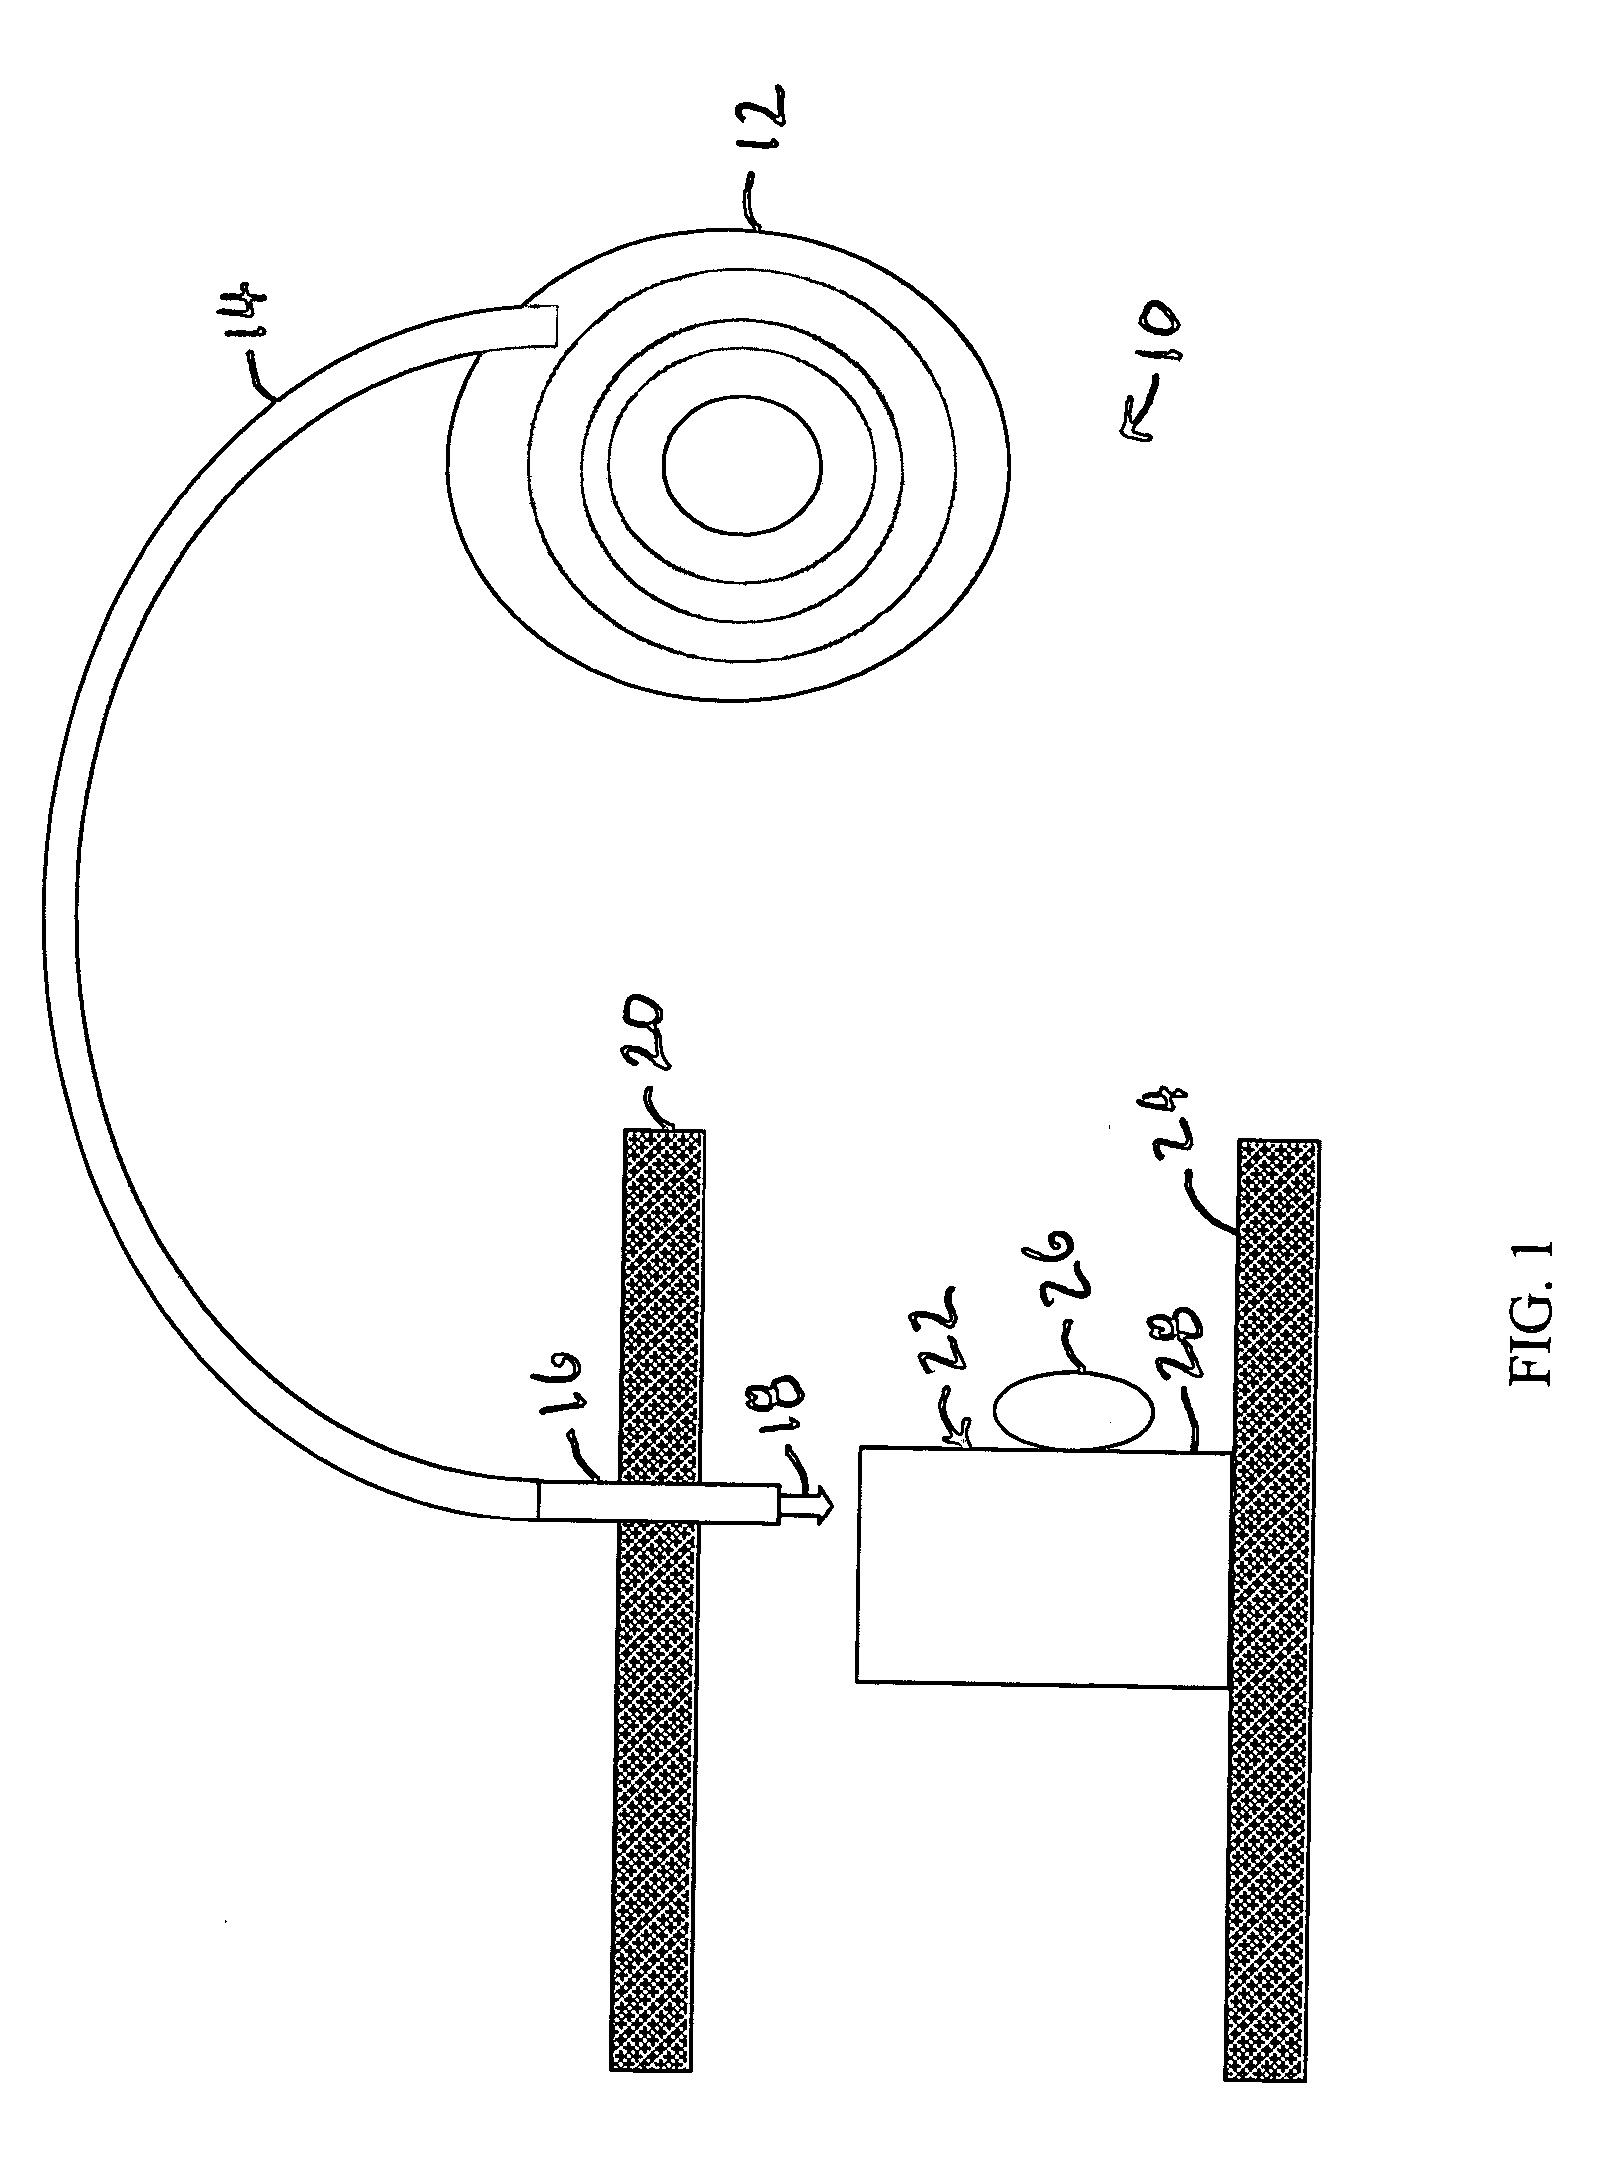 Decoratively finished thermoplastic product and method for manufacturing same